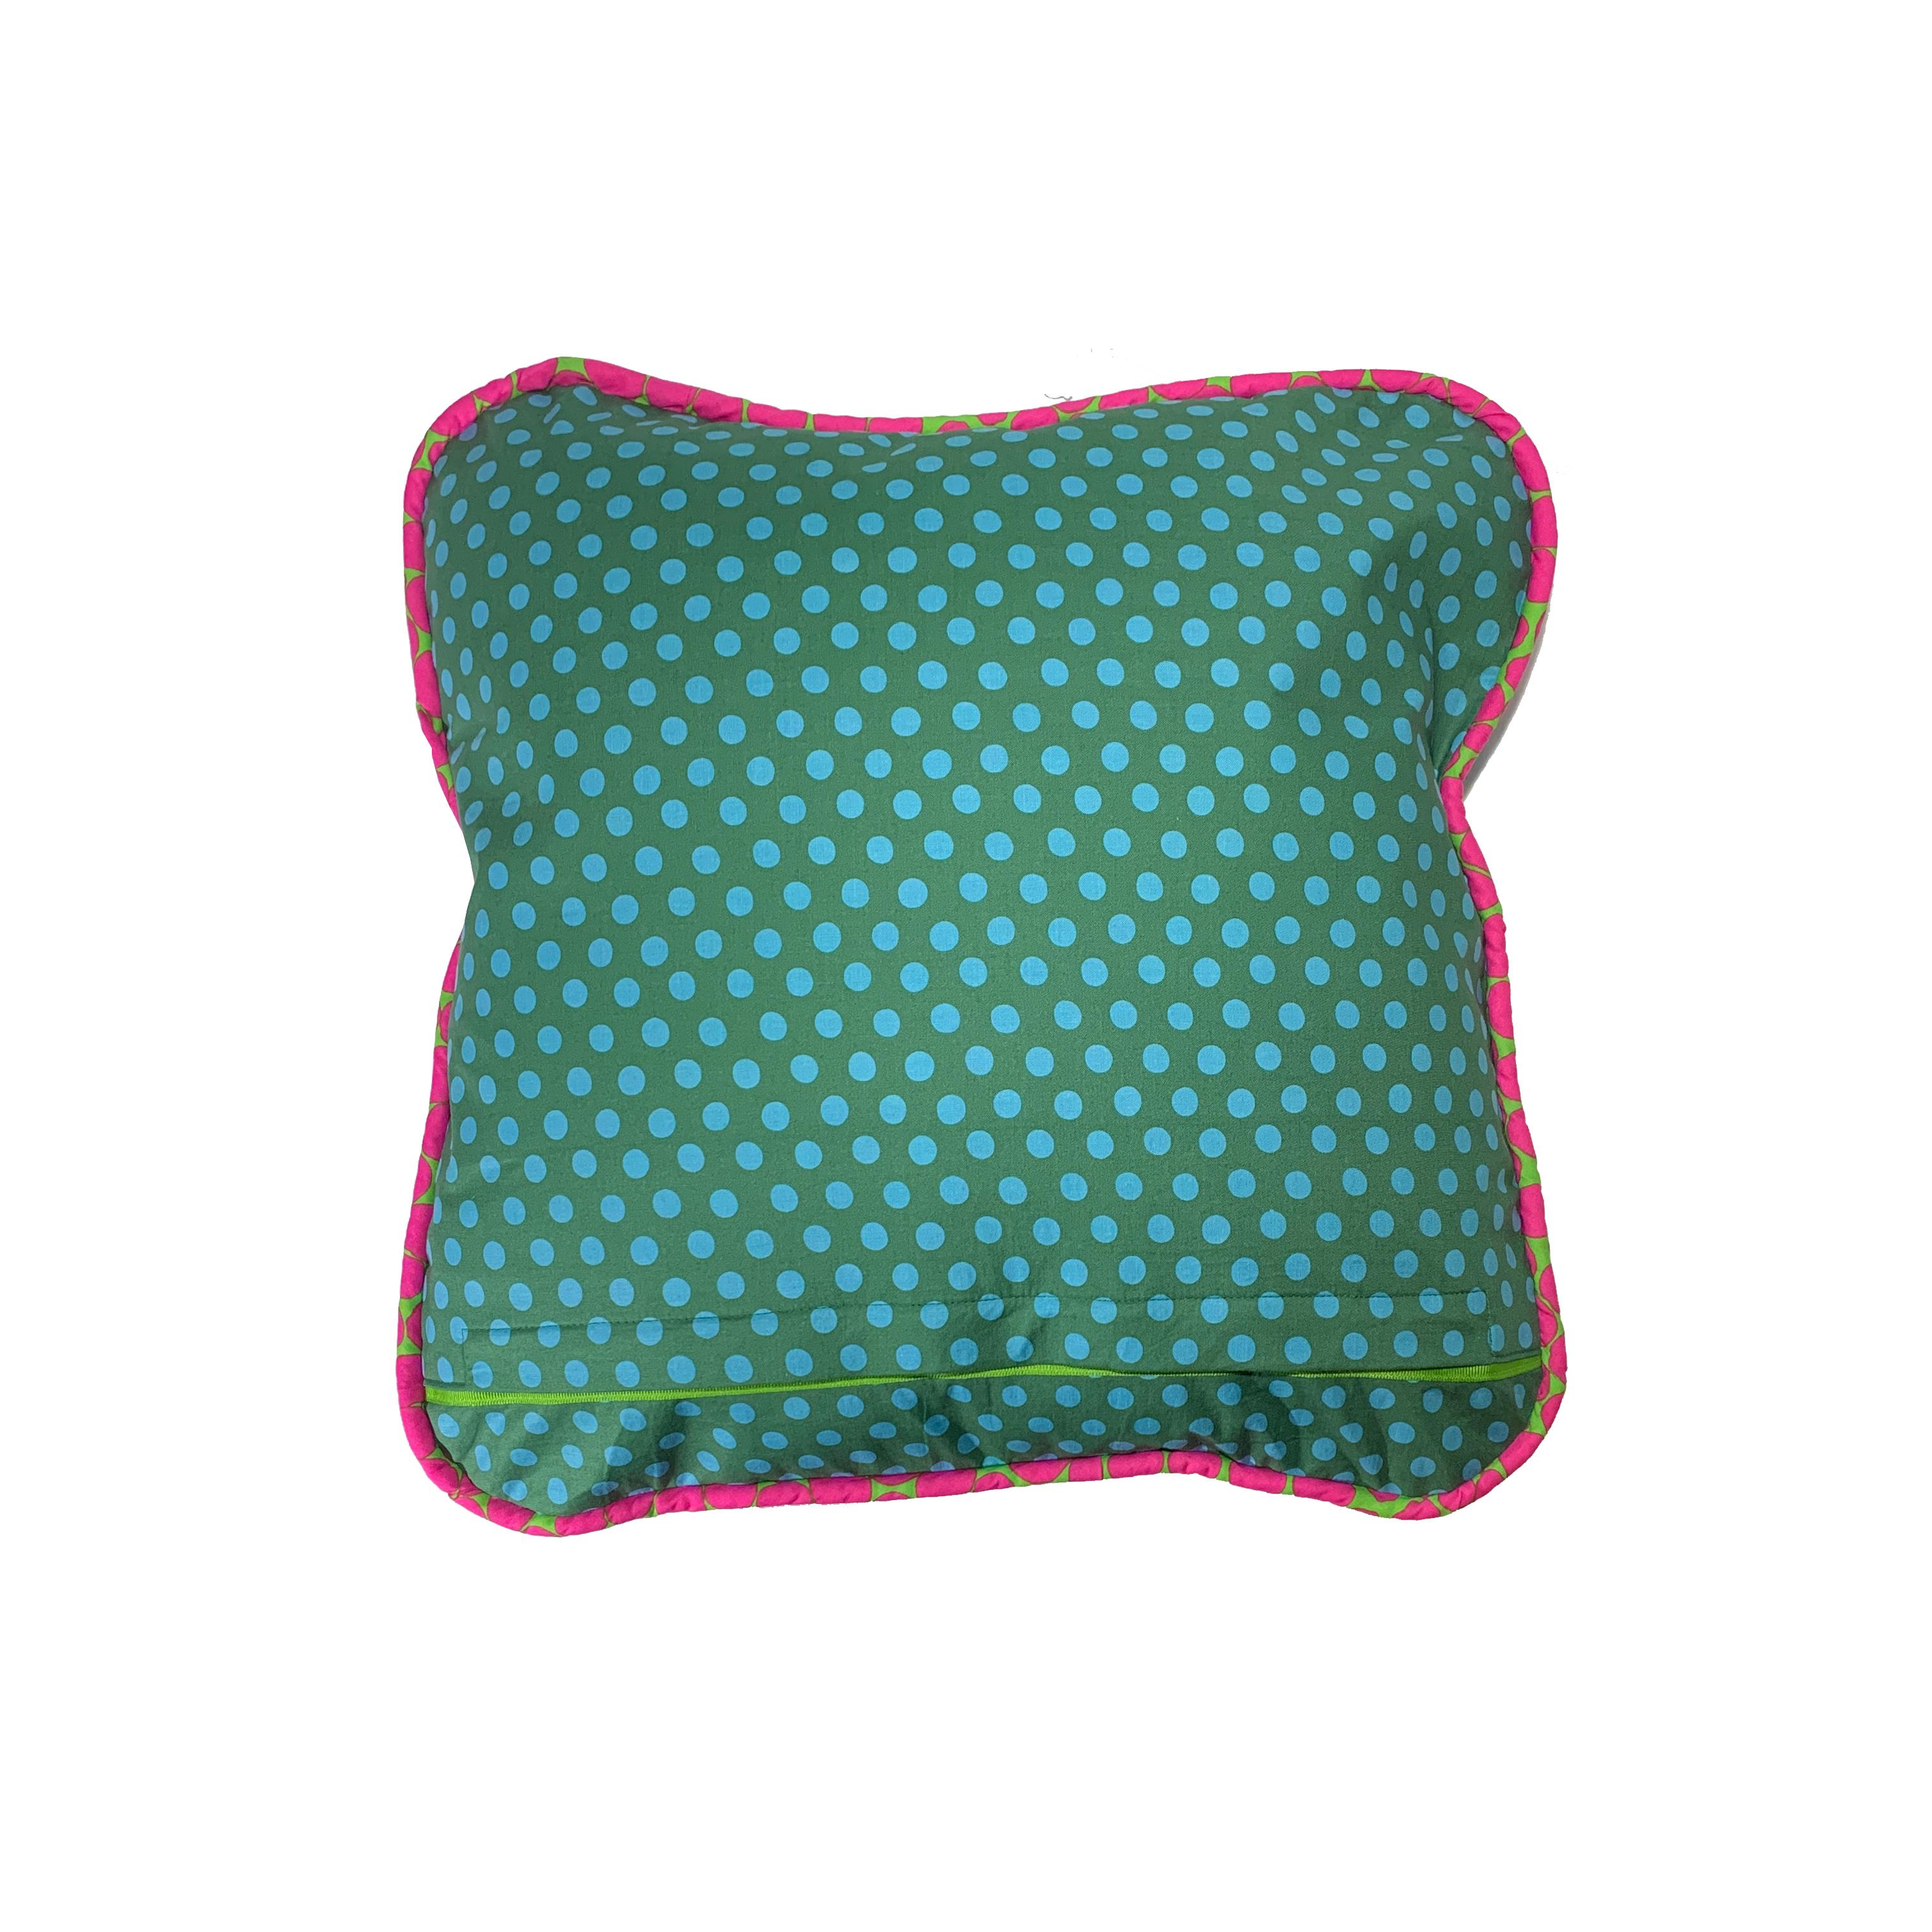 Cotton Growing Green Pillow For Sale